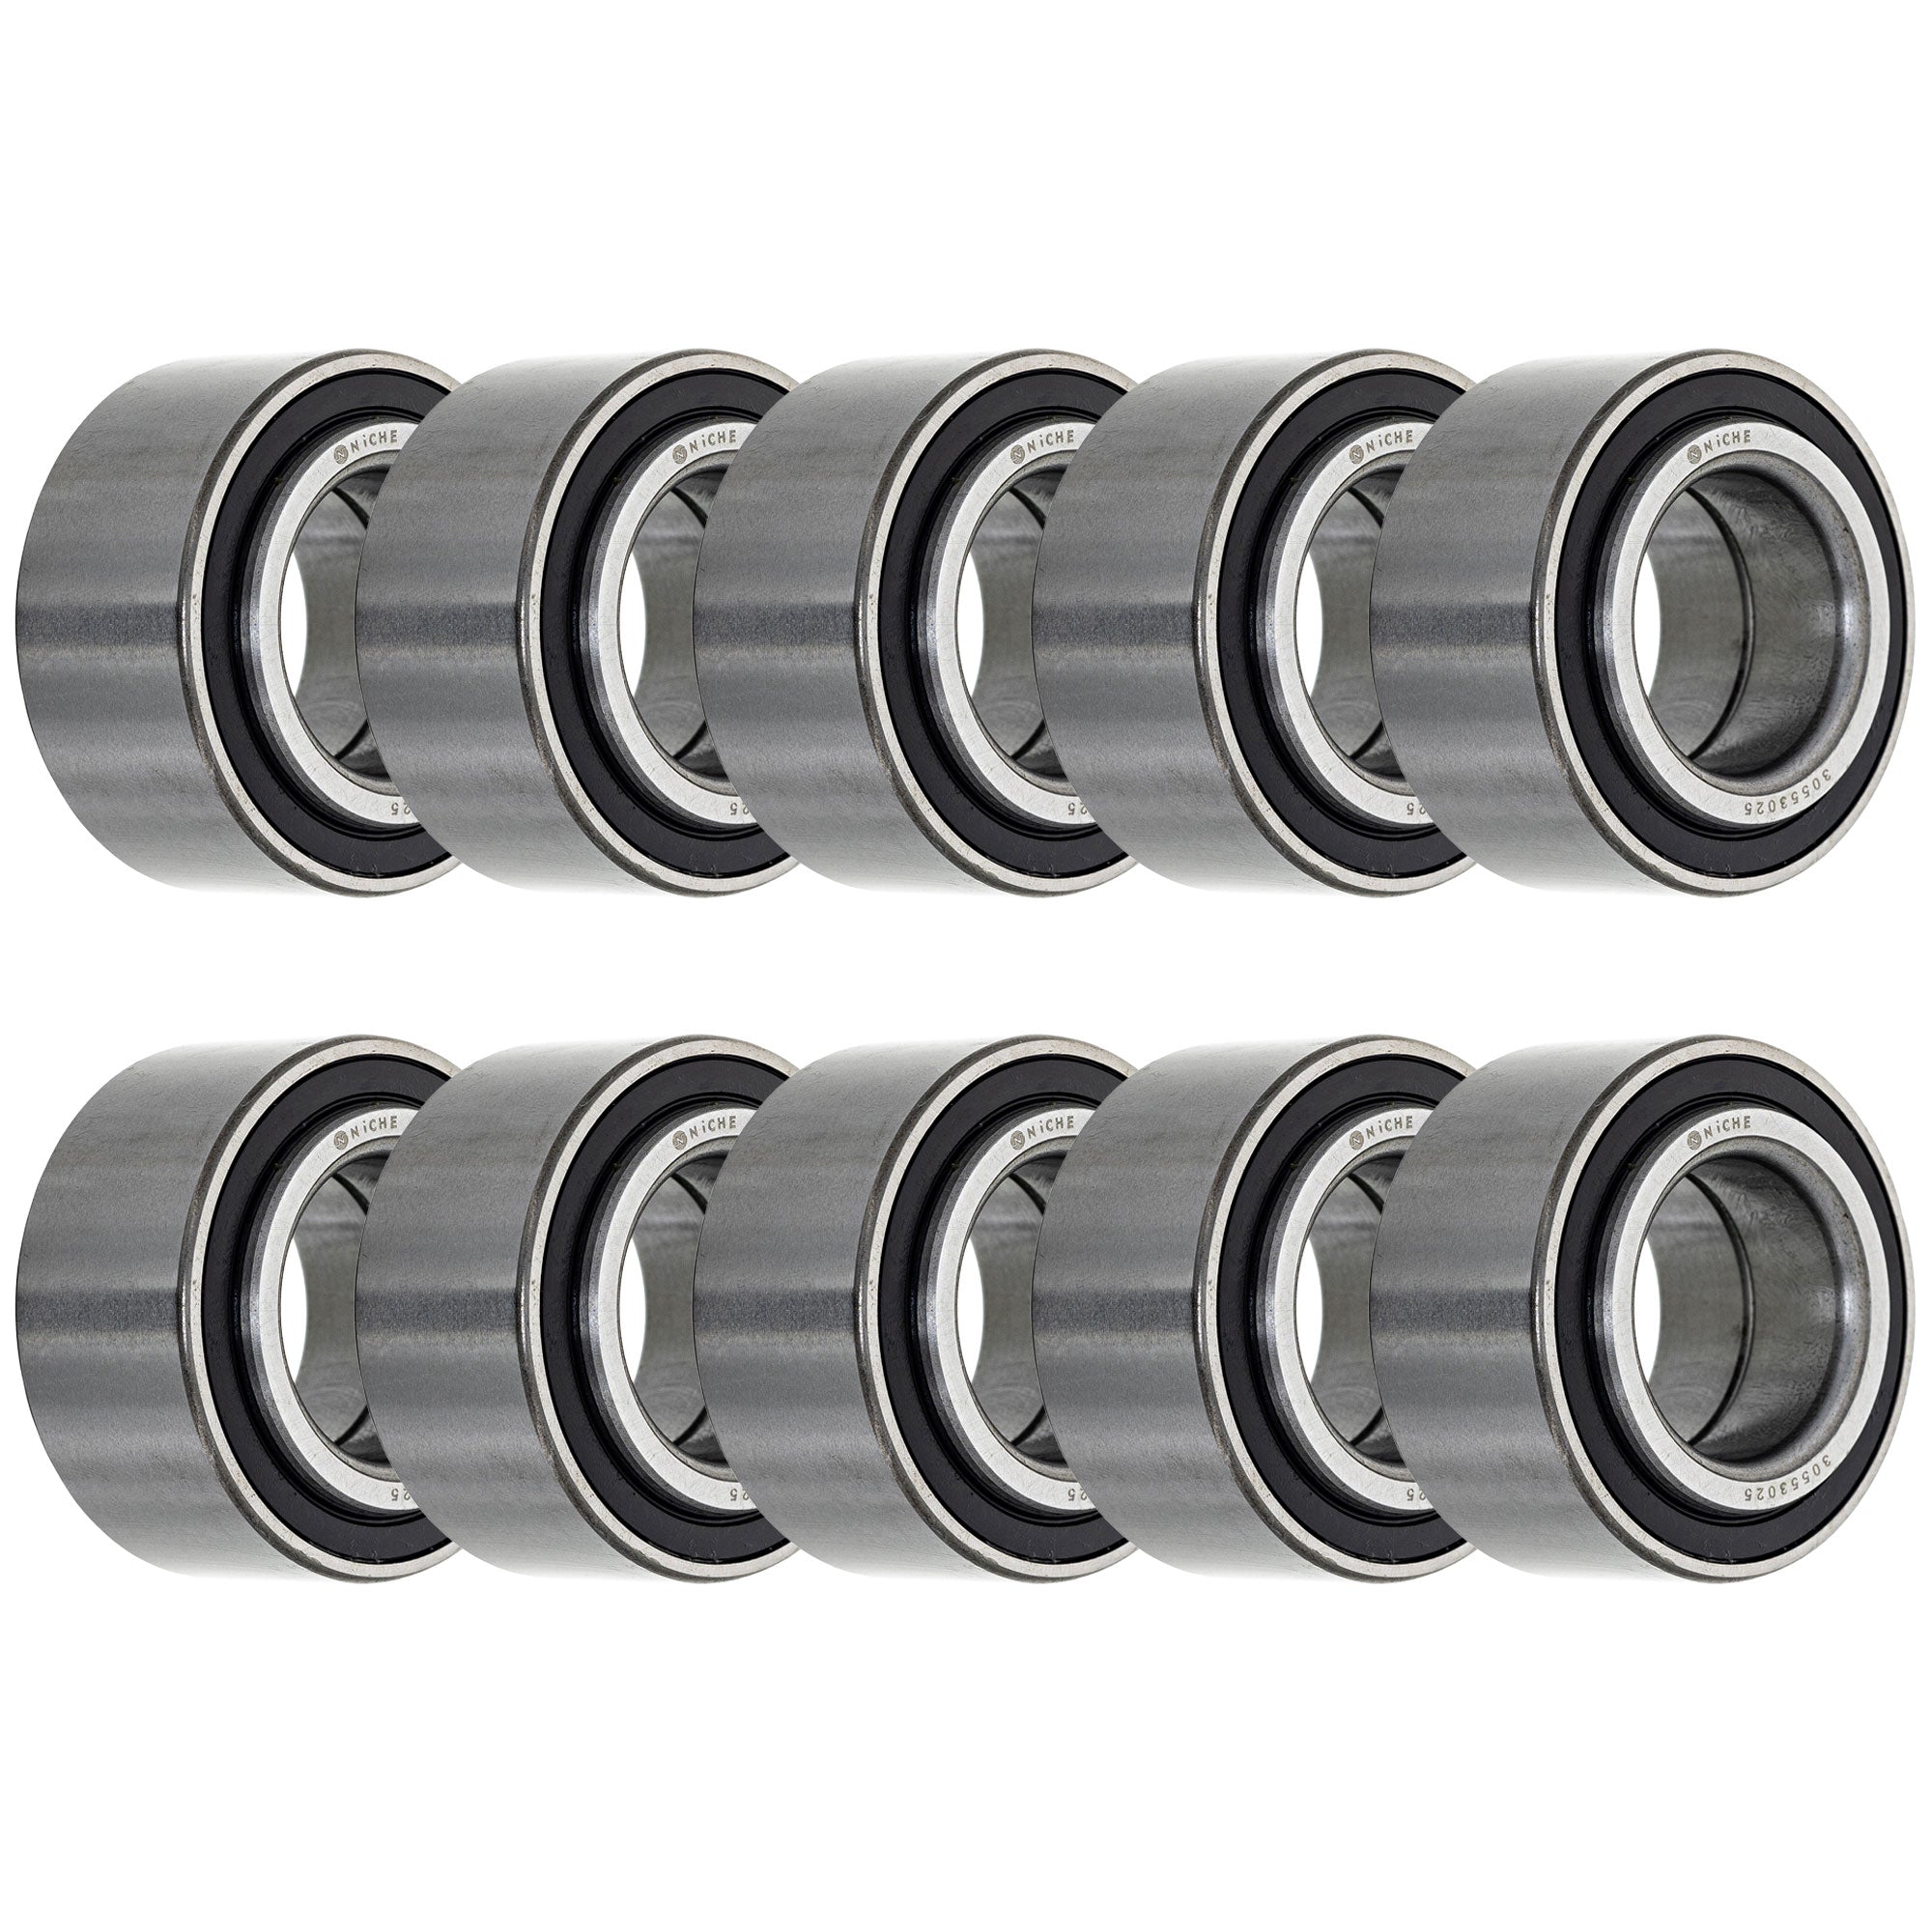 Double Row, Angular Contact, Ball Bearing Pack of 10 10-Pack for zOTHER Cat NICHE 519-CBB2263R